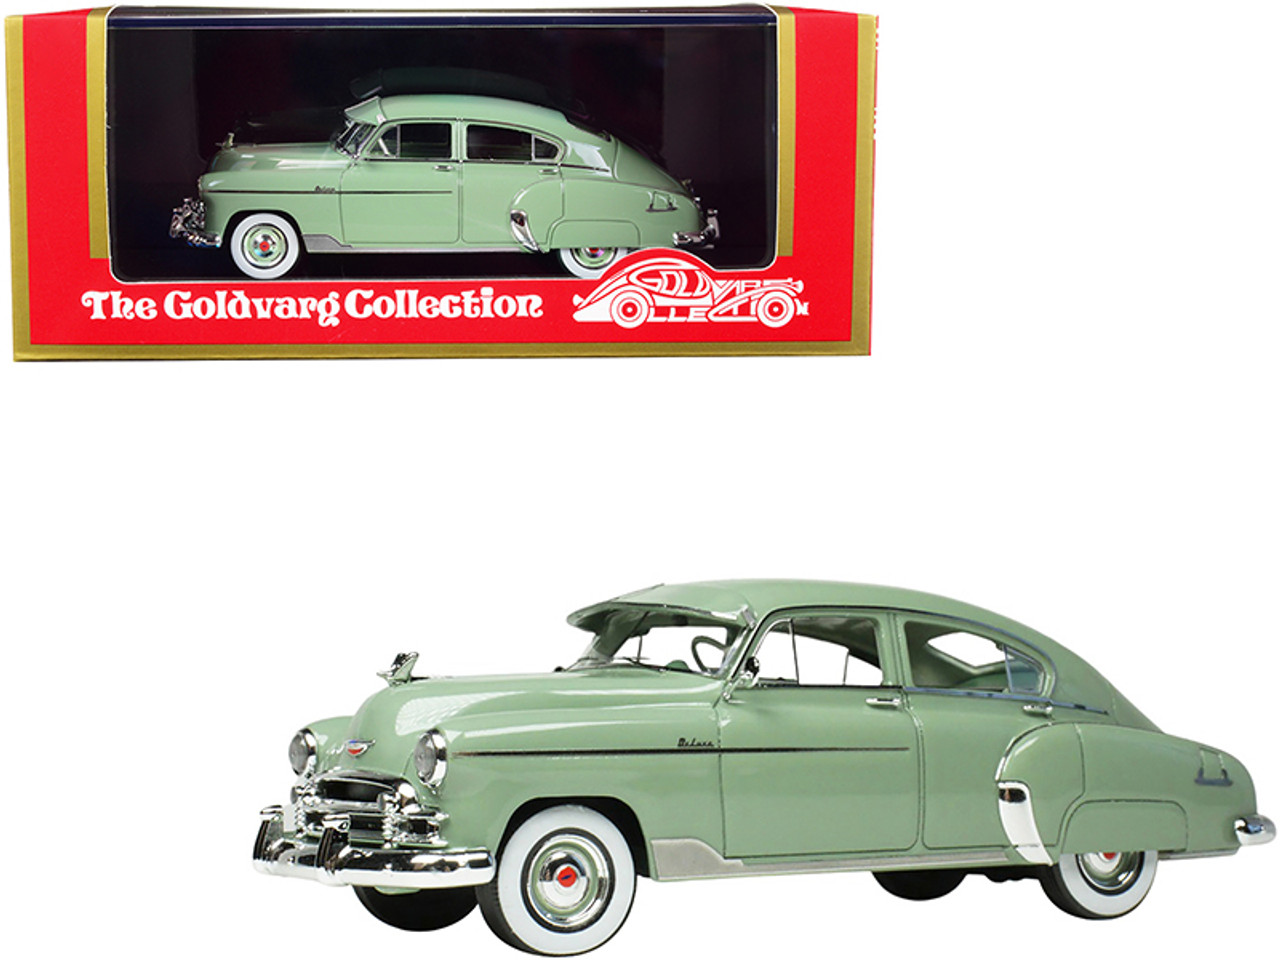 1950 Chevrolet Fleetline DeLuxe 4-Door Sedan Mist Green with Green Interior Limited Edition to 280 pieces Worldwide 1/43 Model Car by Goldvarg Collection